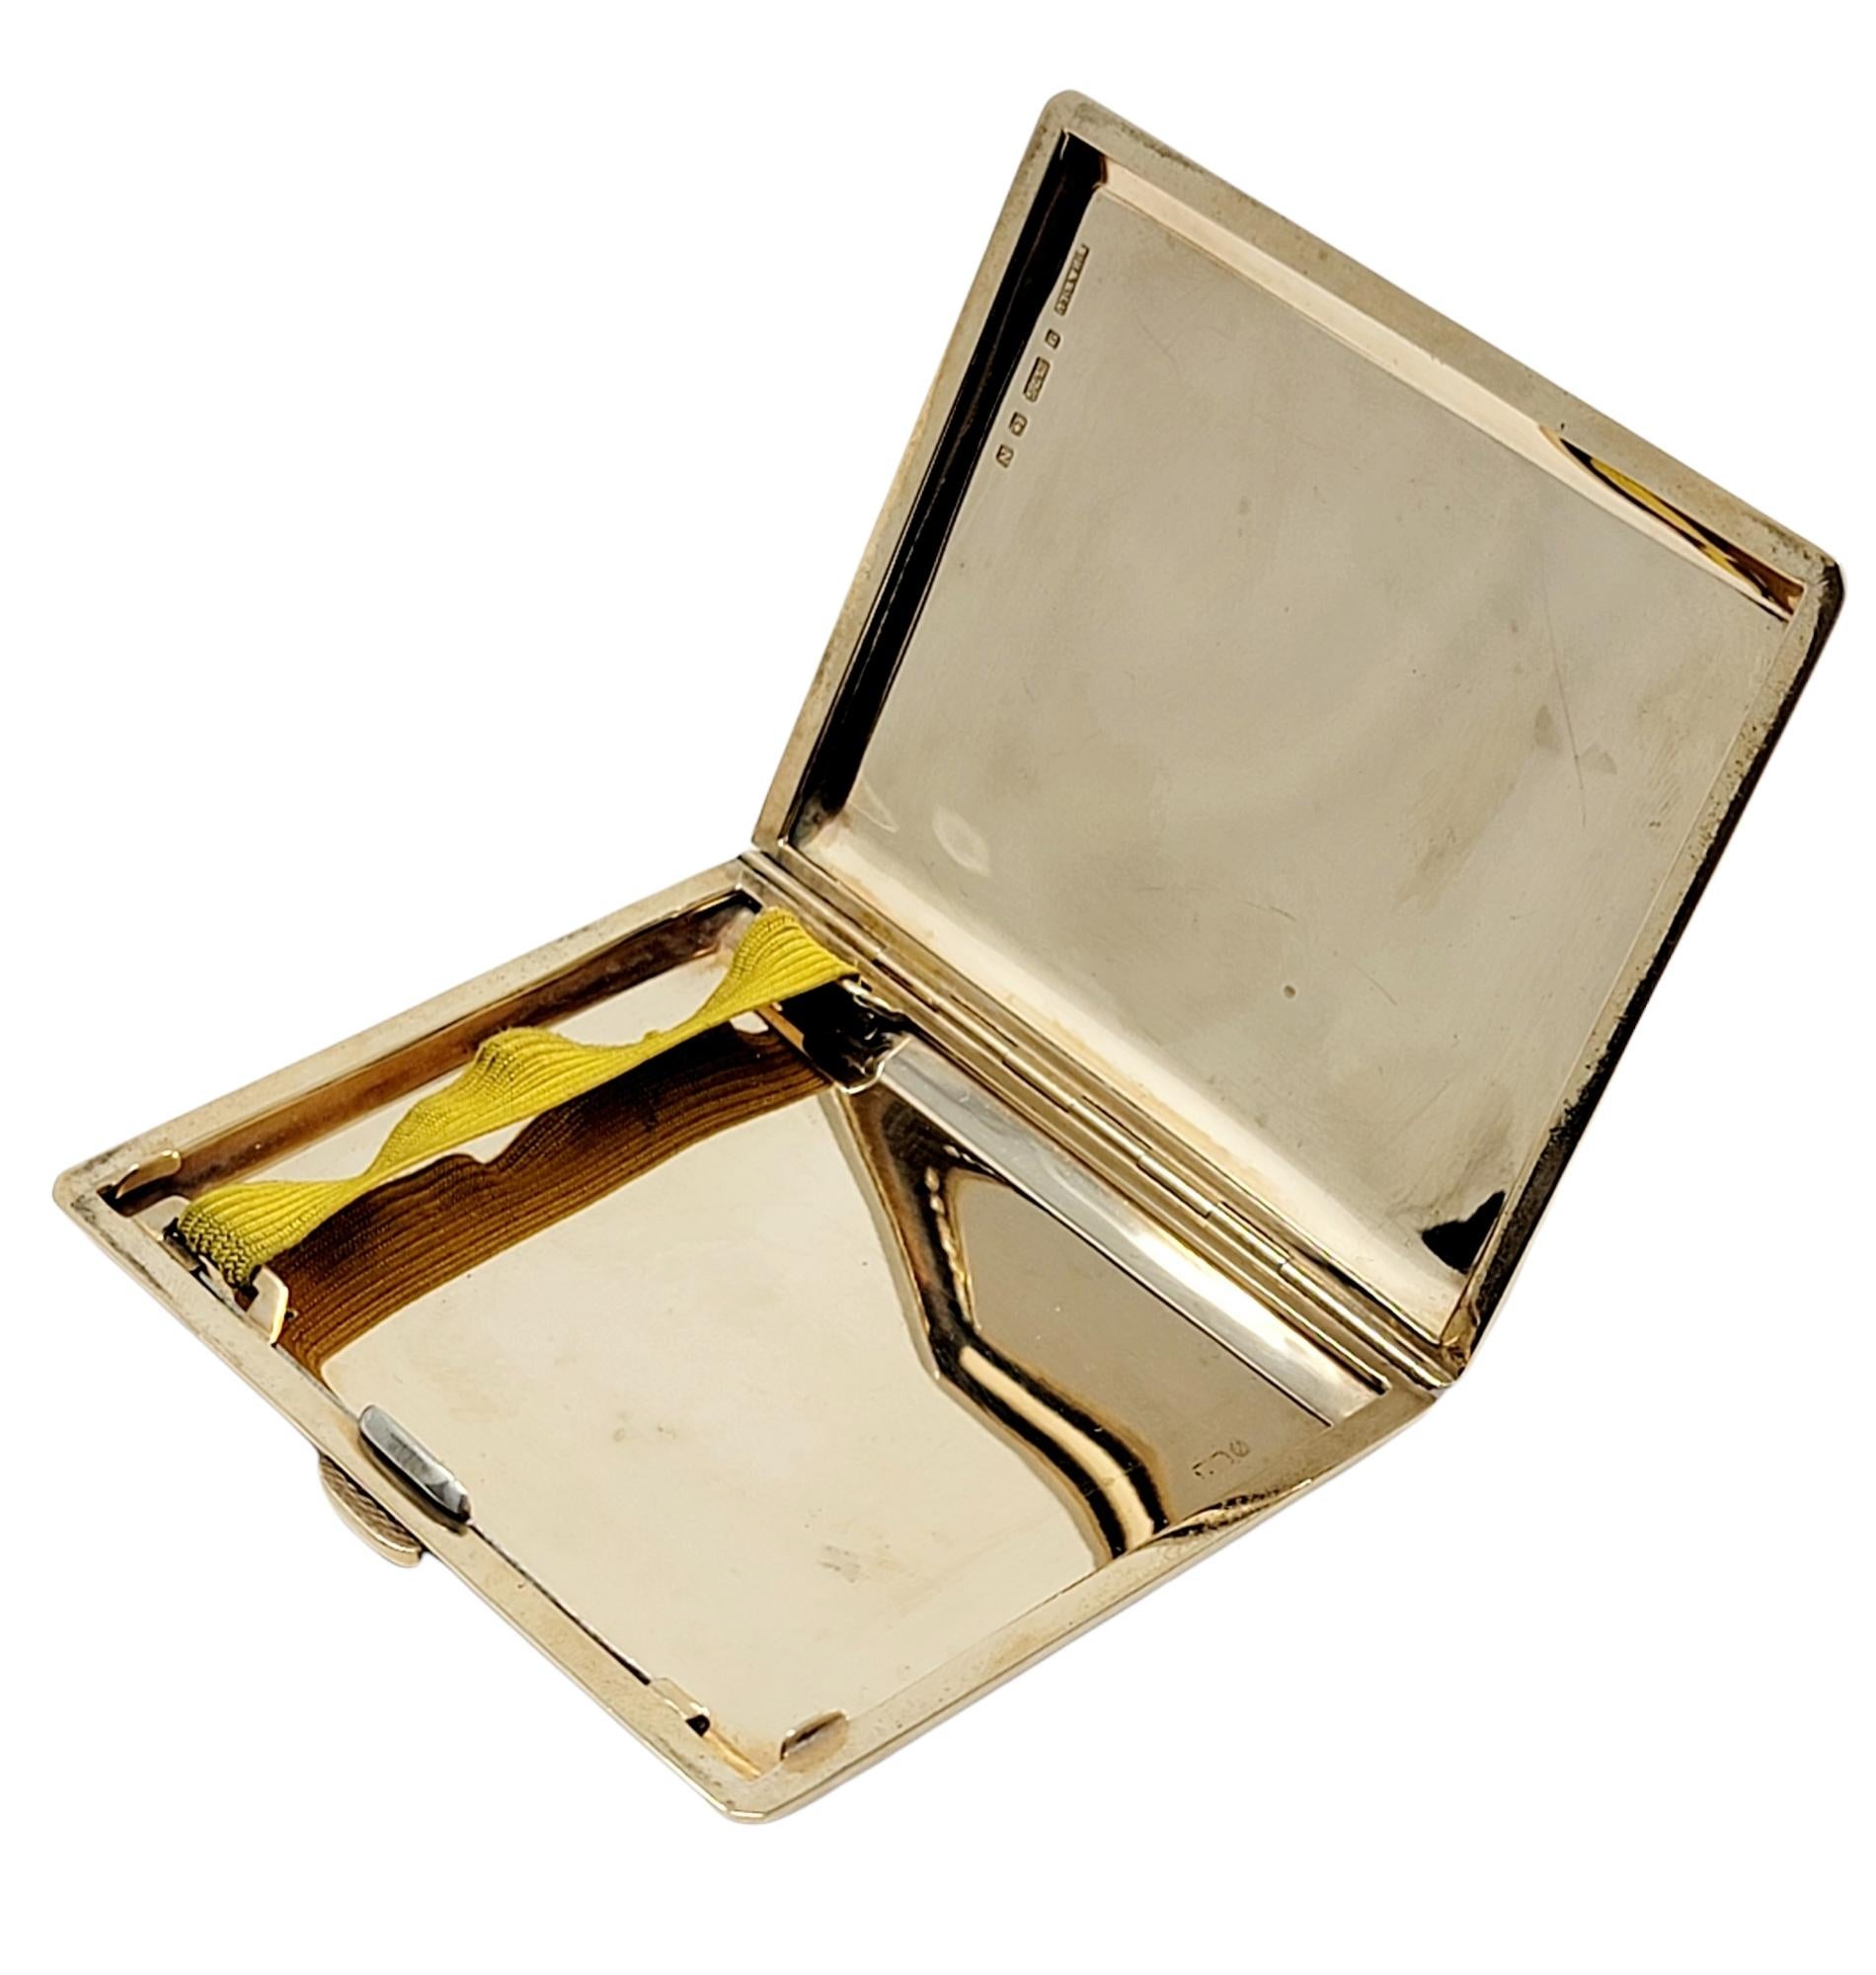 Contemporary Antique 9 Karat Yellow Gold Hinged Cigarette Case/ Box with Elastic Holder 